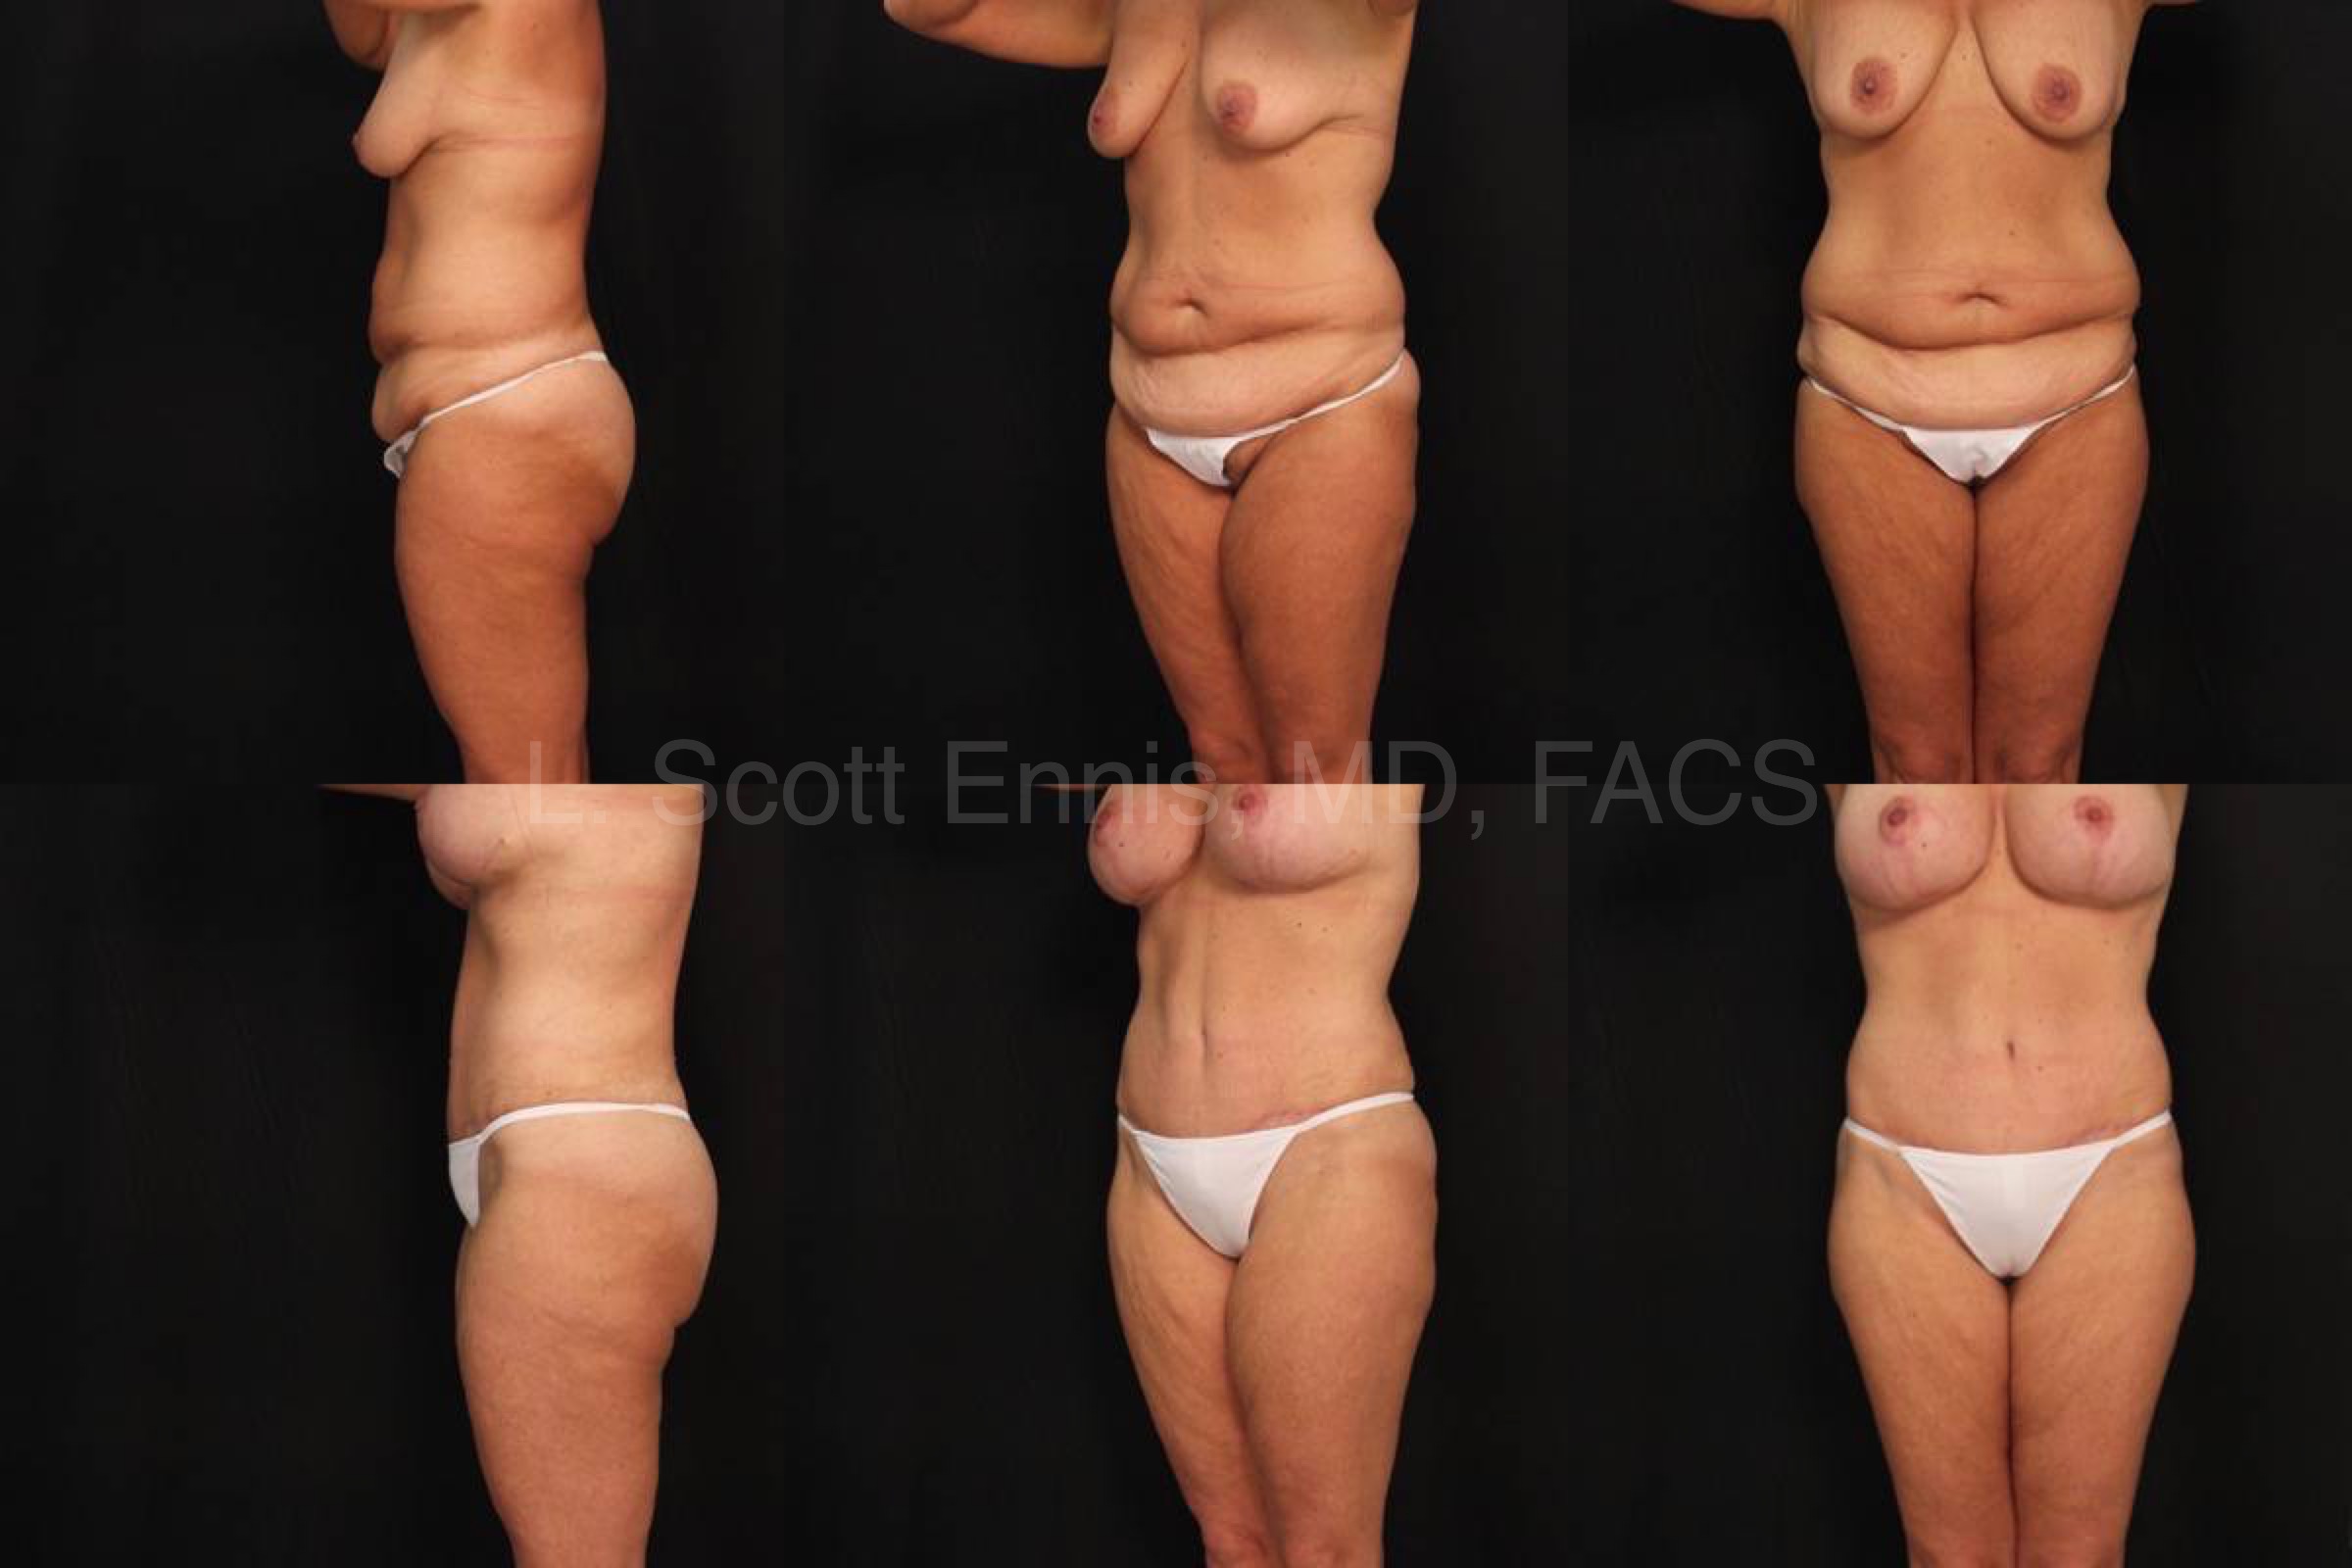 Mommy Make over Liposuction of hips_ abdominoplasty Mastopexy breast aug R500 L450 silicone Before and After Ennis Plastic Surgery Palm Beach Boca Raton Destin Miami Fort Lauderdale